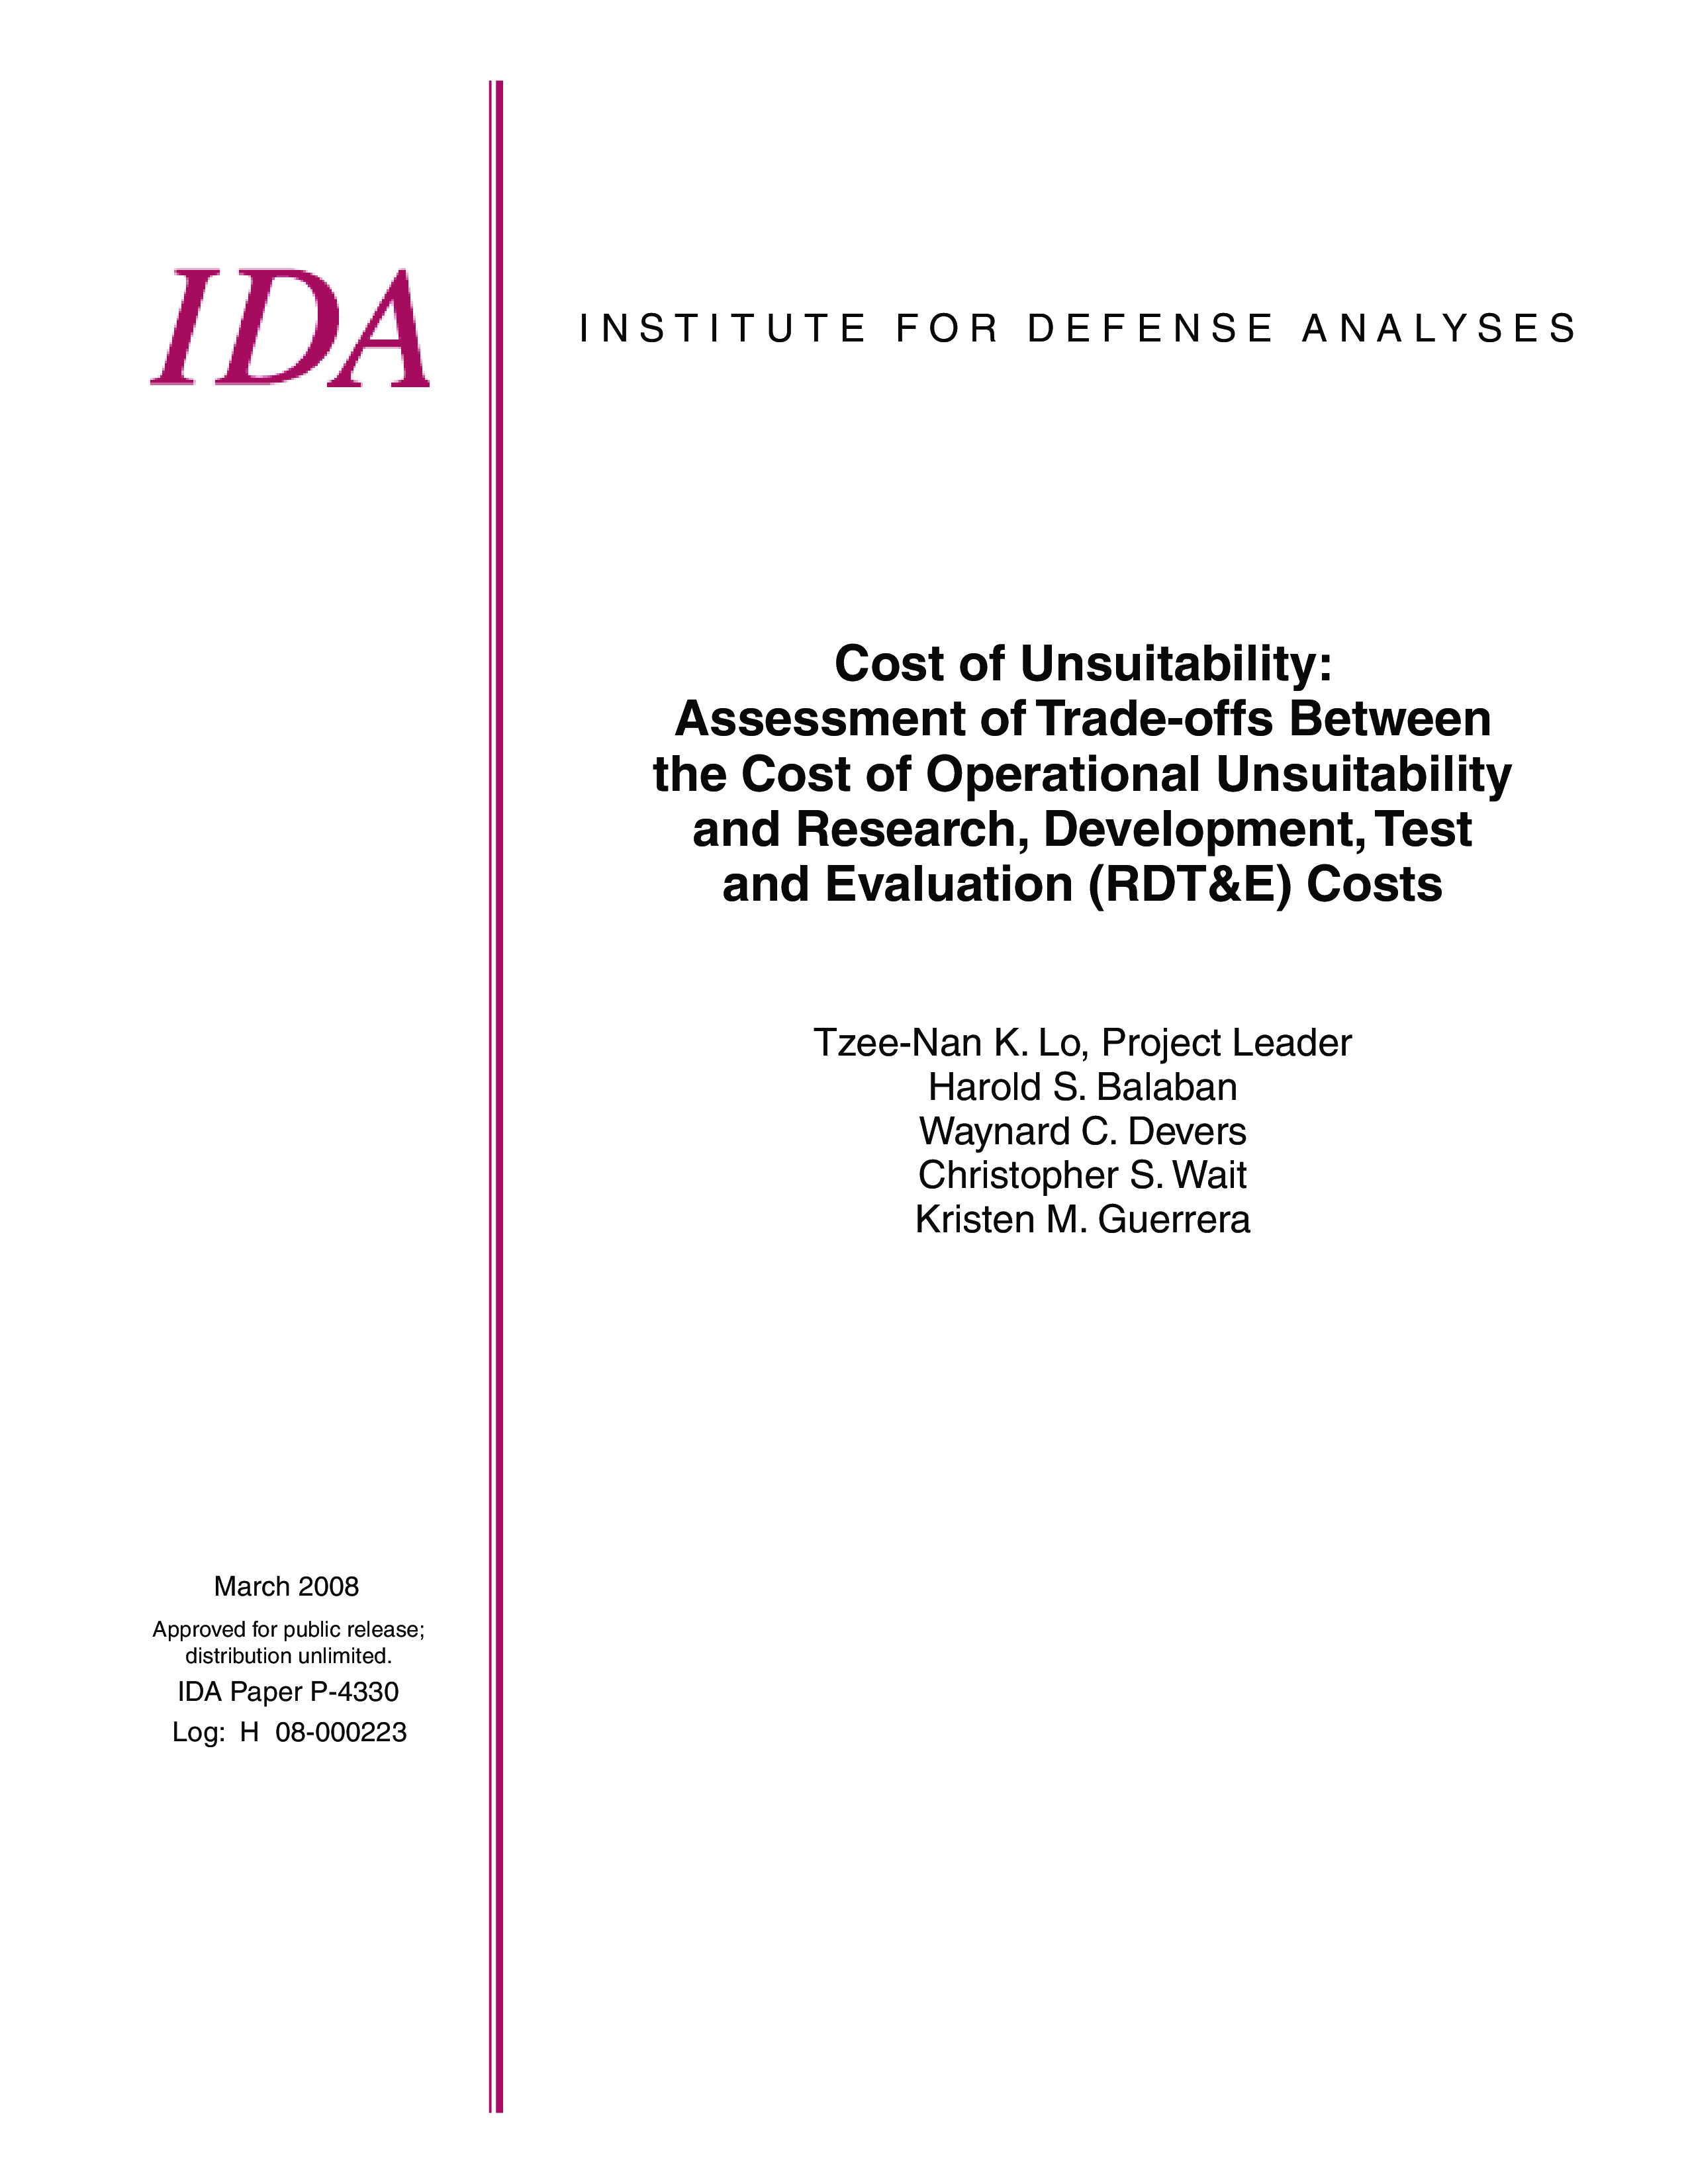 Cost of Unsuitability: Assessment of Trade-offs Between the Cost of Operational Unsuitability and Research, Development, Test and Evaluation (RDT&E) Costs